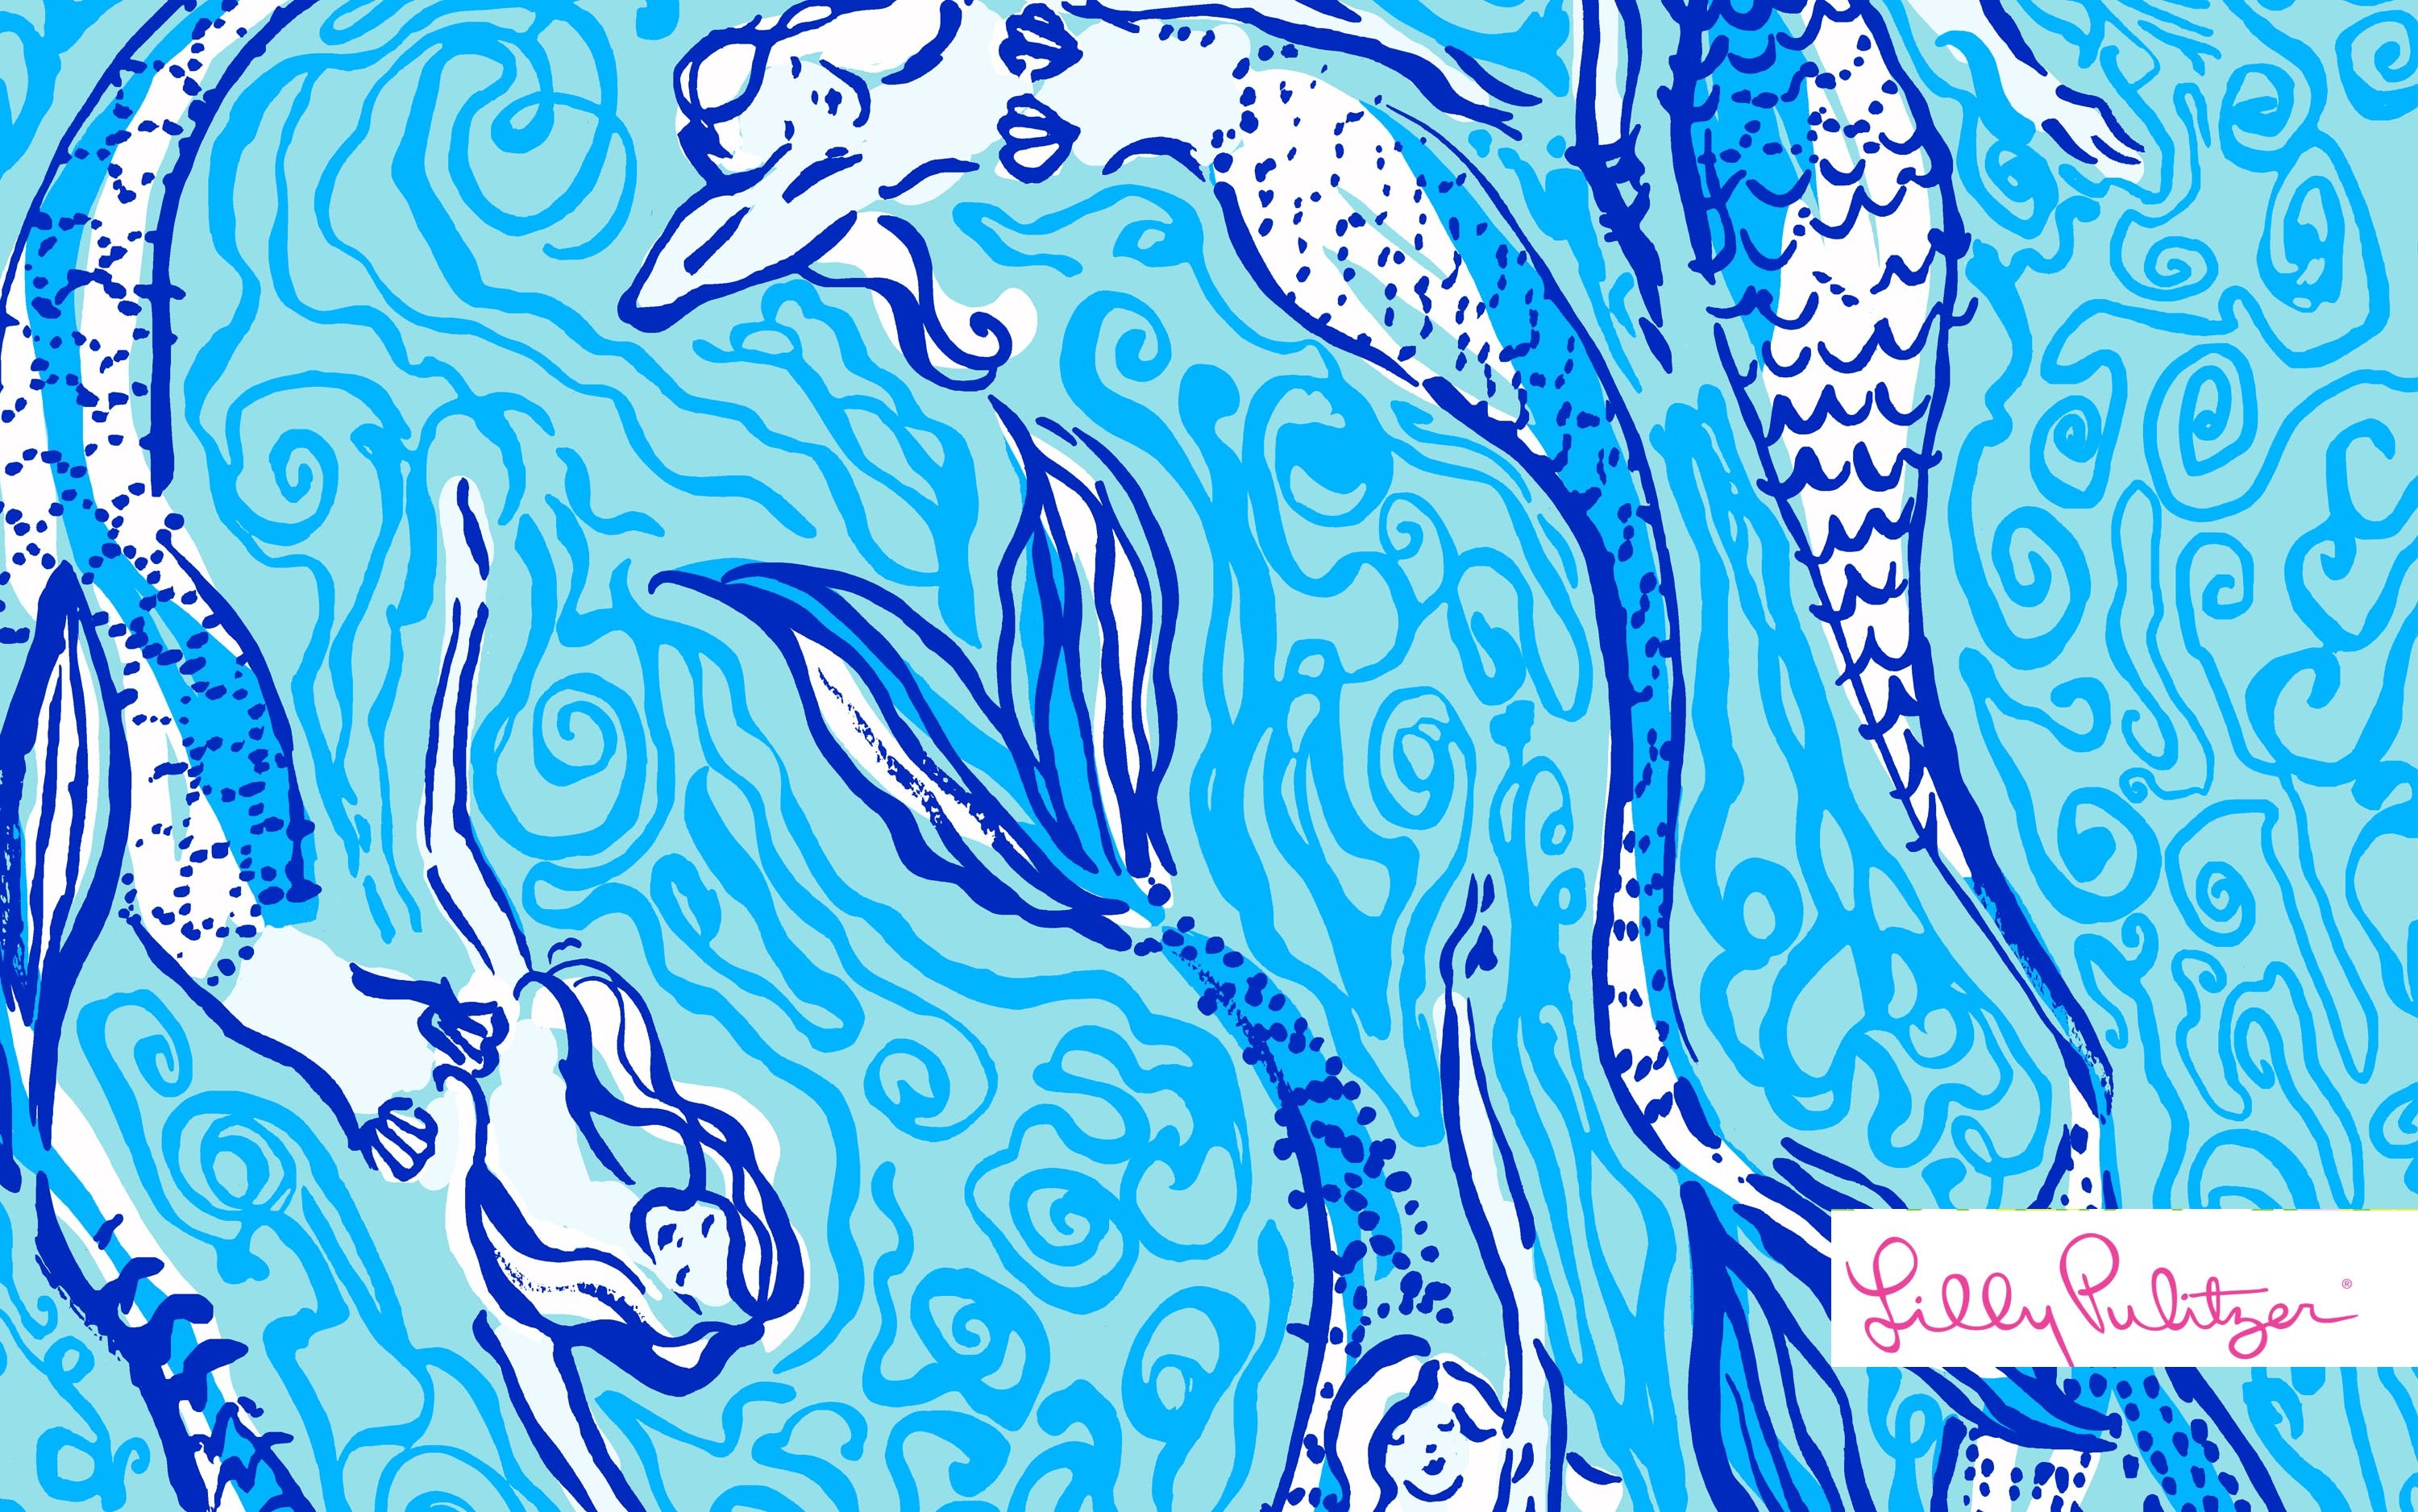 3000x1876 best ideas about Lilly pulitzer iphone wallpaper on Pinterest 3000Ã1876